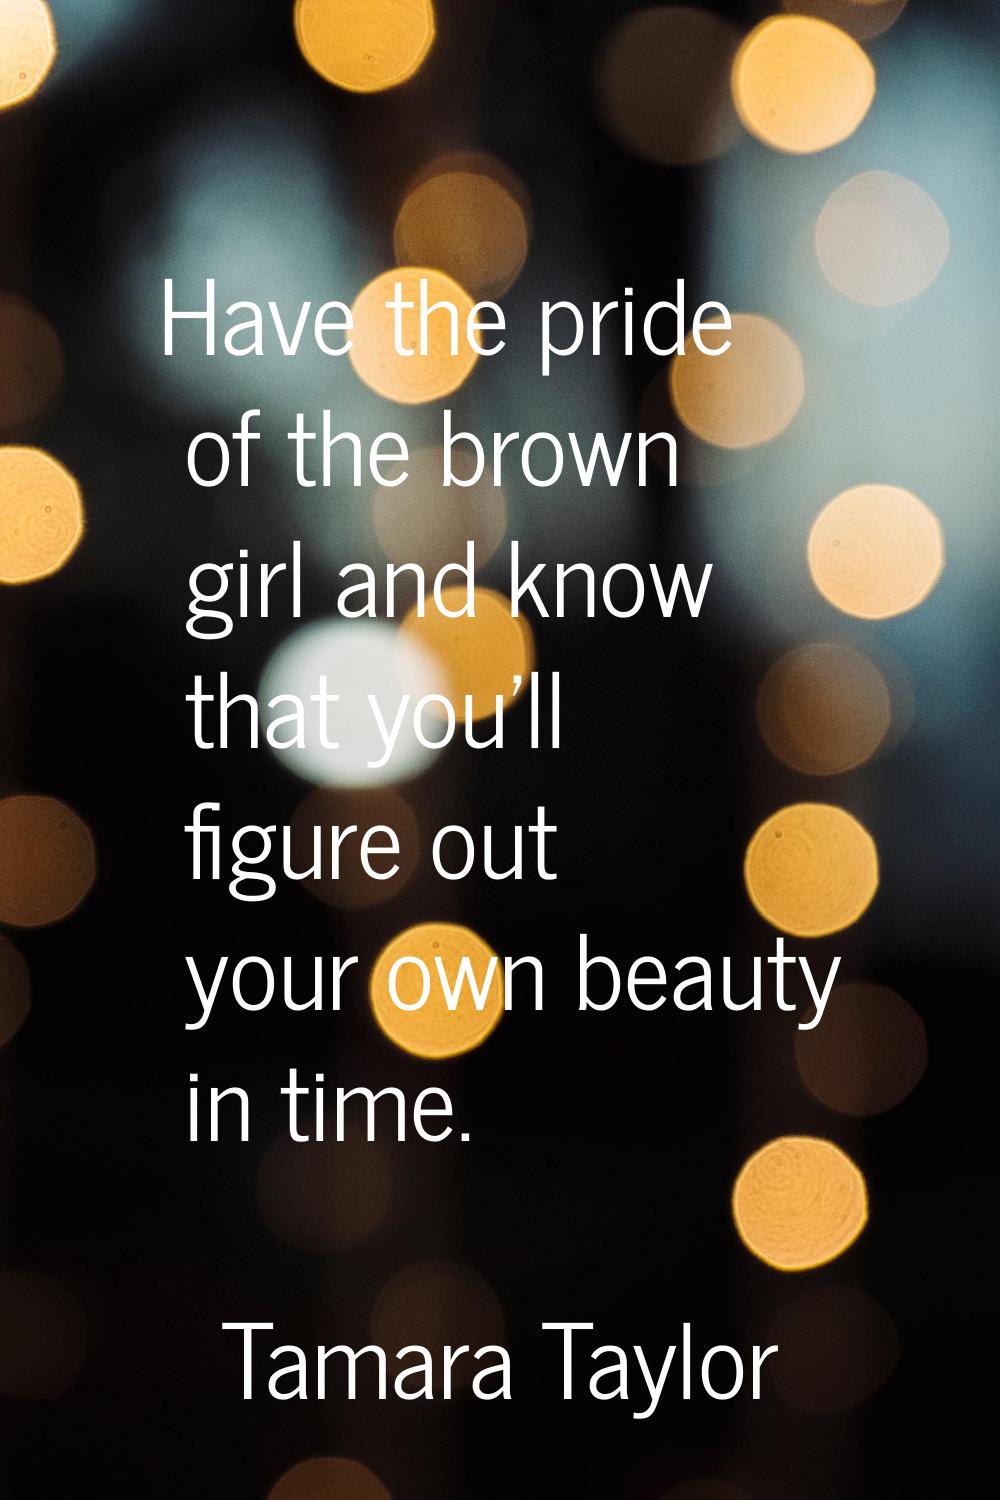 Have the pride of the brown girl and know that you'll figure out your own beauty in time.